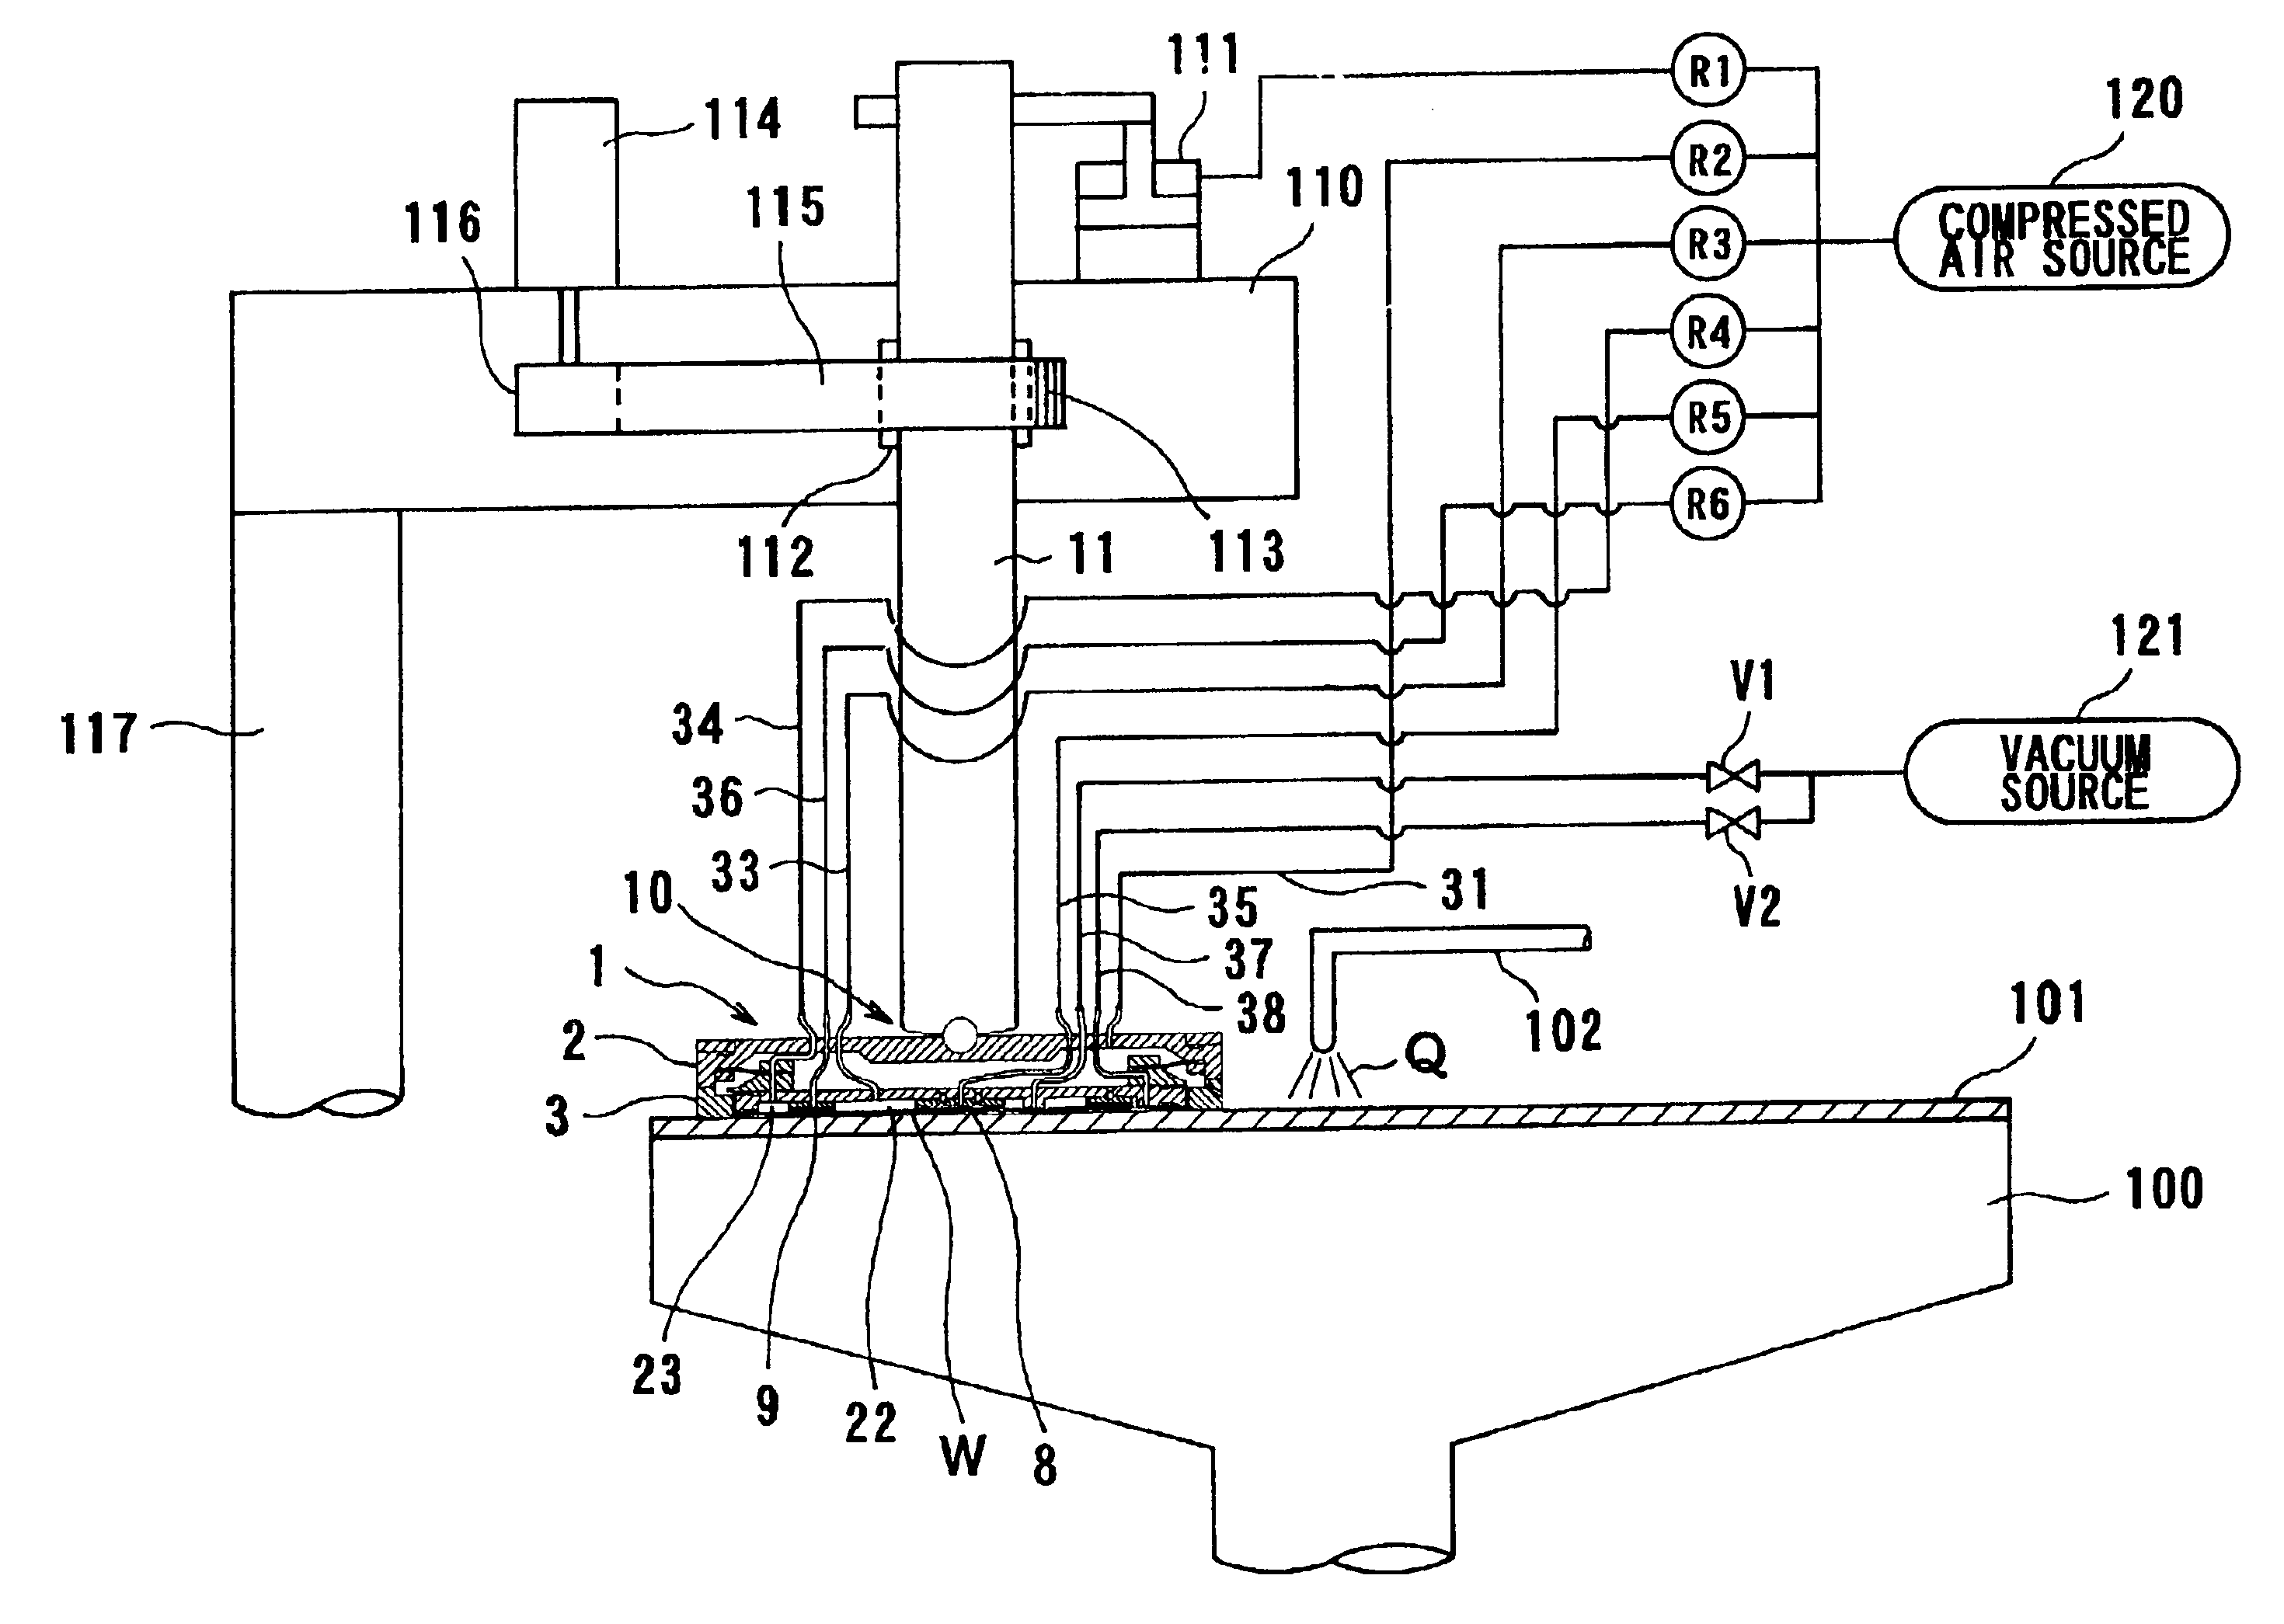 Substrate holding apparatus